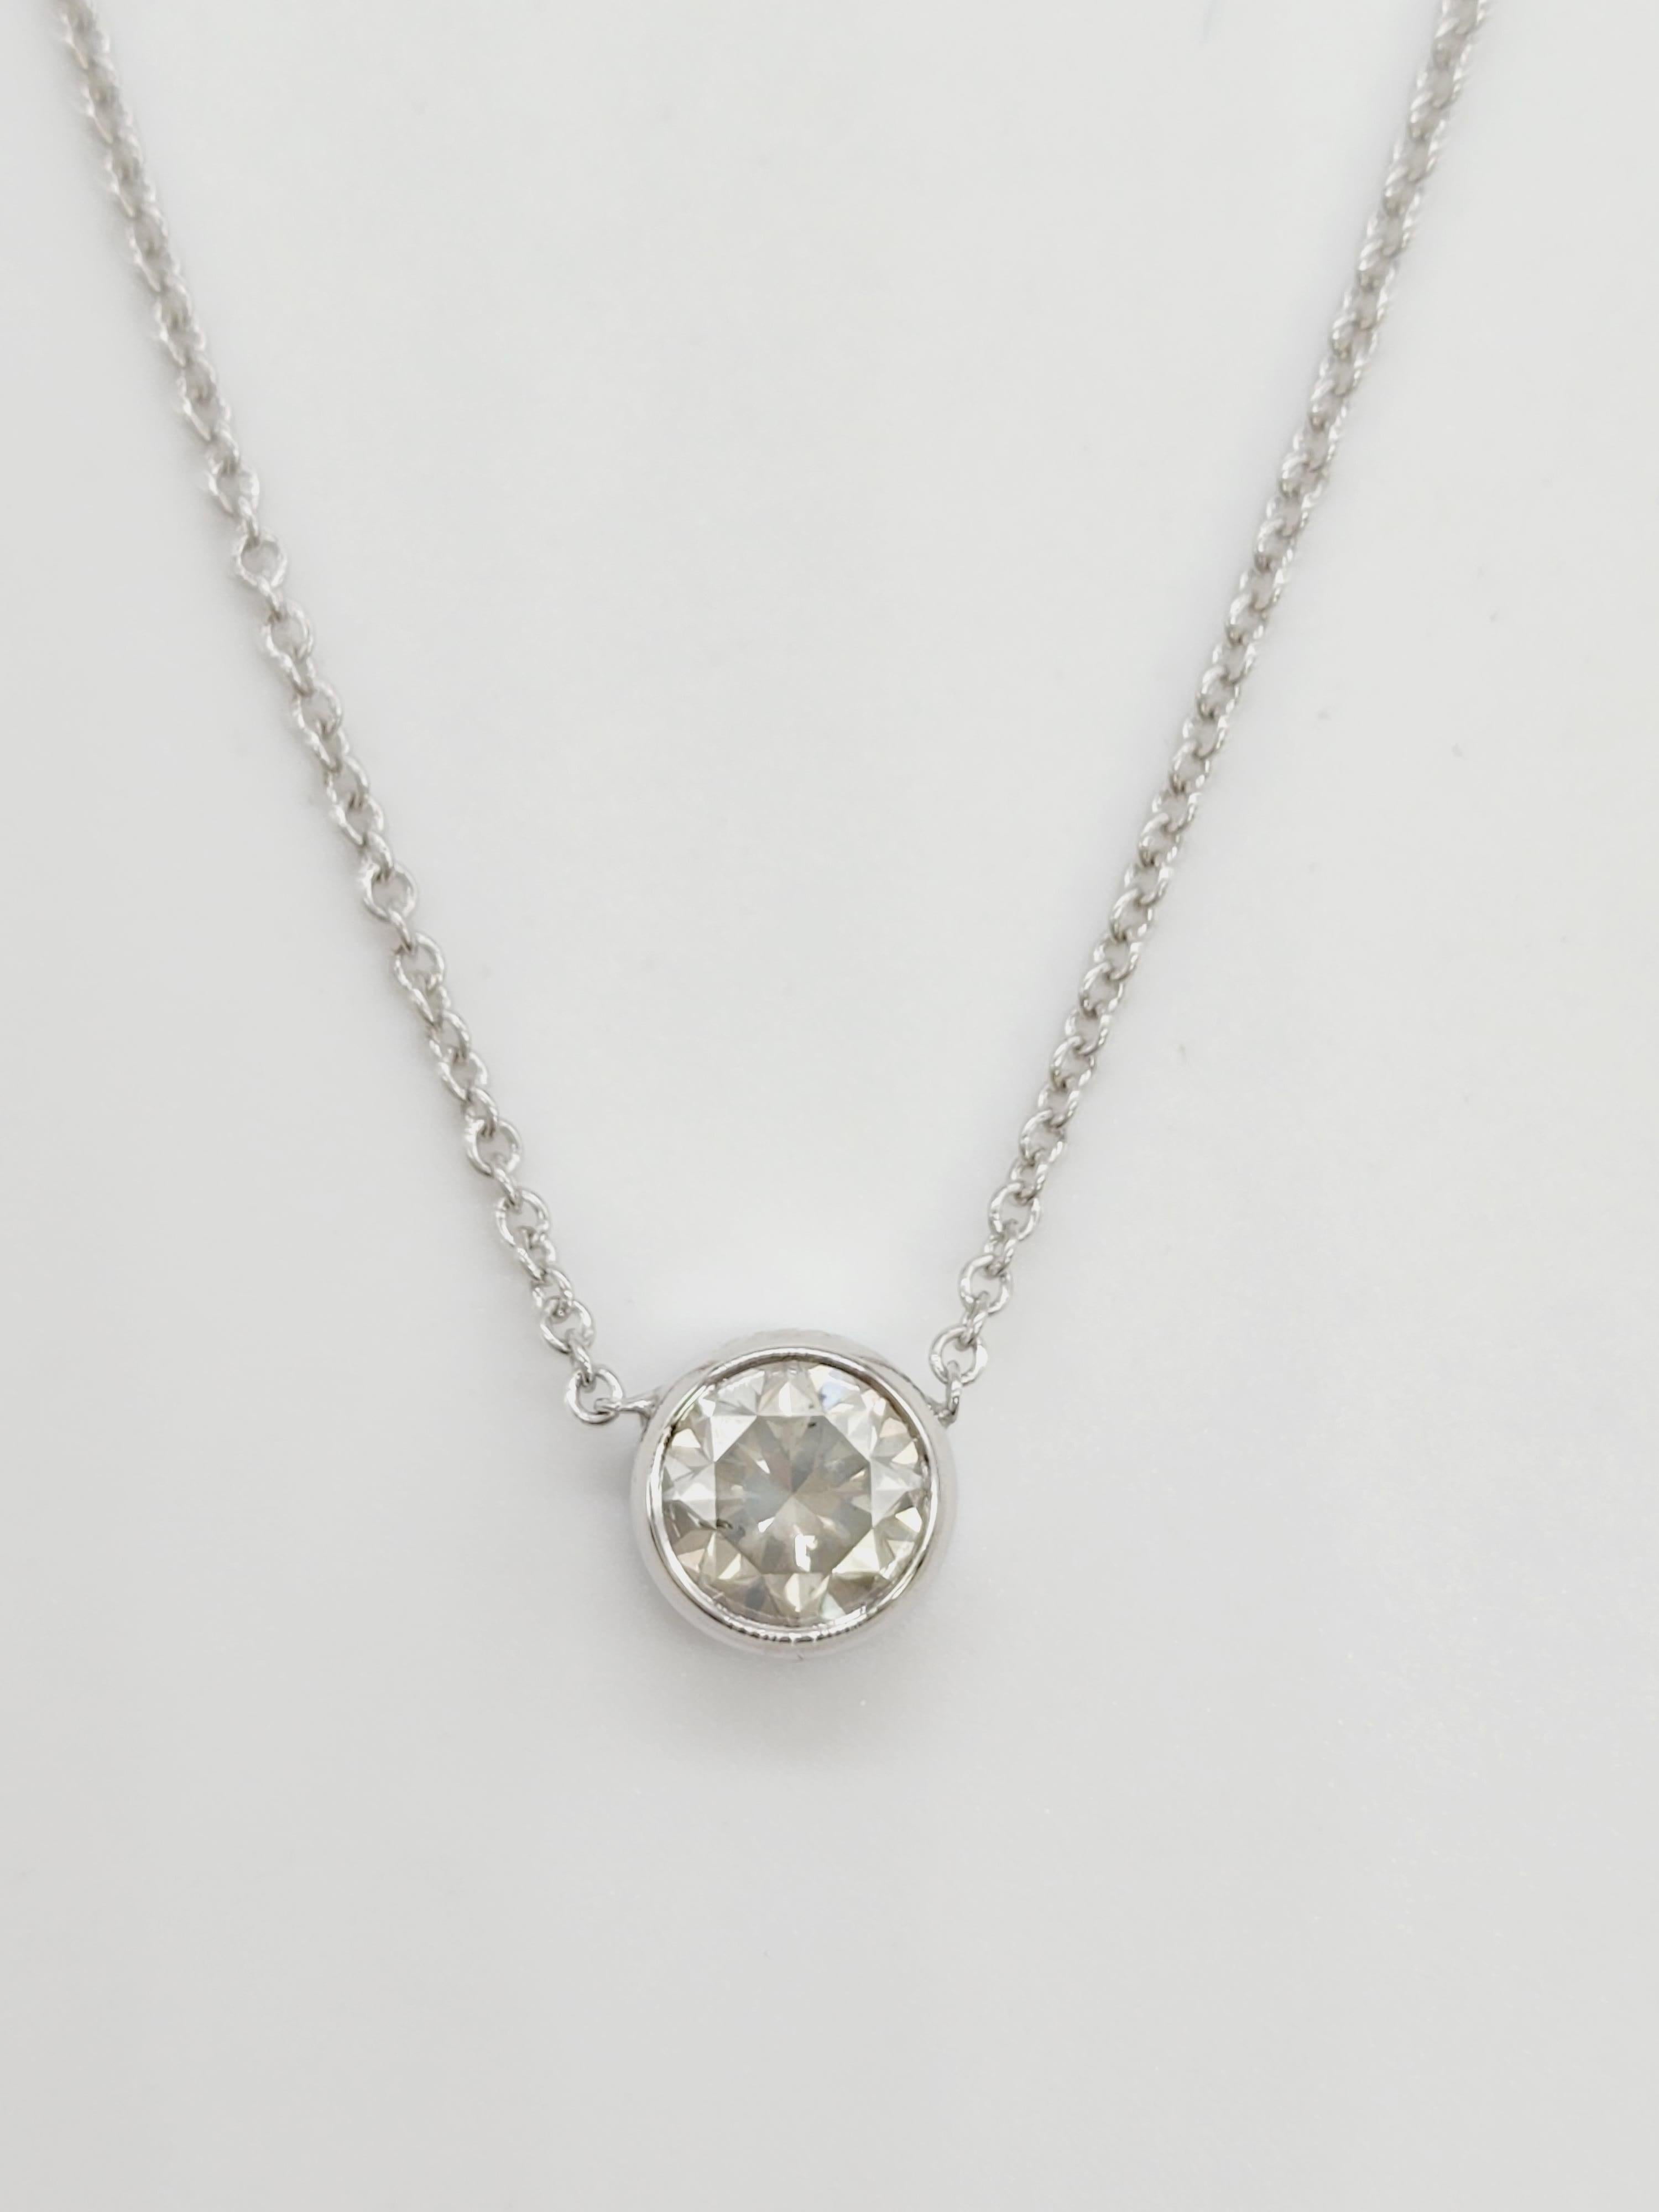 GIA 0.91 Carat Round Very Light Gray Diamond Pendant 14 Karat White Gold In New Condition For Sale In Great Neck, NY